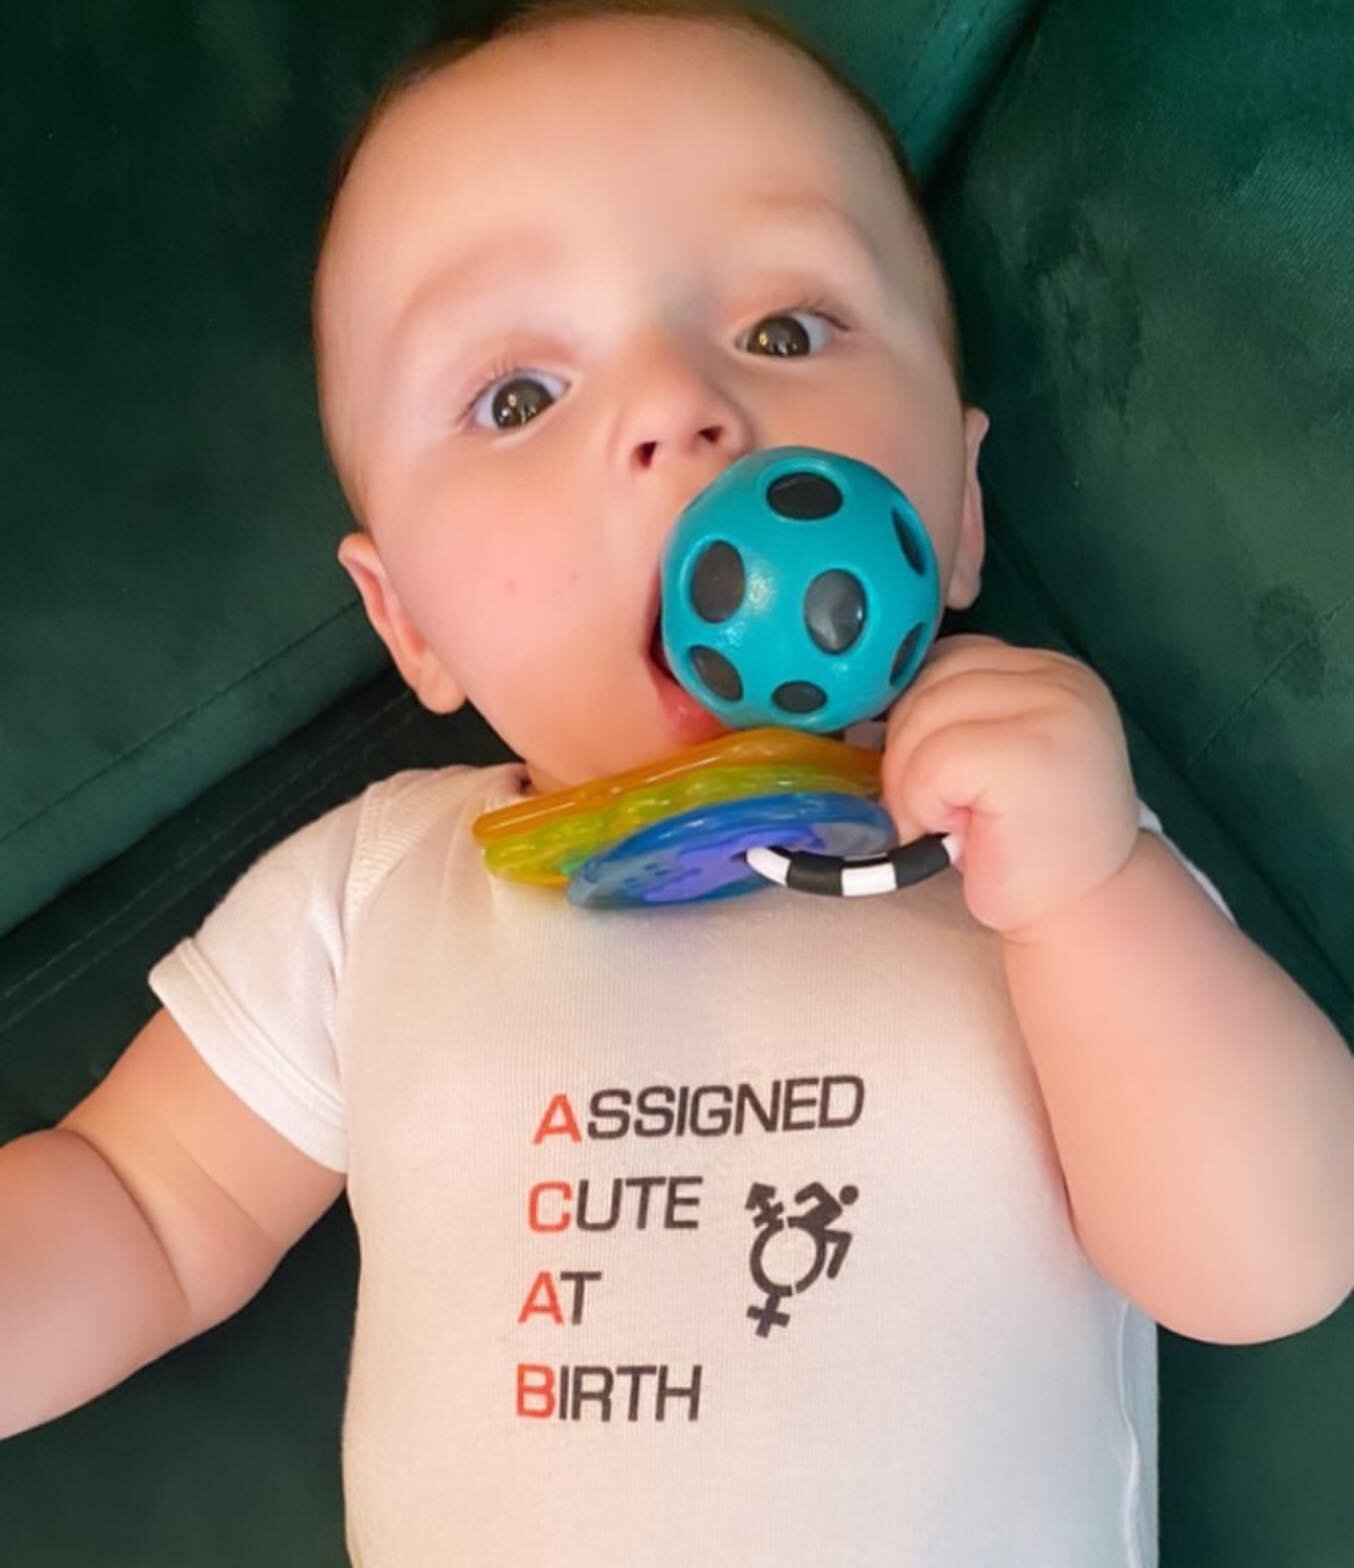 Yesterday people were saying that my &ldquo;Assigned Cute At Birth&rdquo; shirt should come in baby sizes, so I&rsquo;m here to inform you that it already does!! Here is @ranch_stressing &lsquo;s lil beeb in his fave onesie (gifted by @sh0p_rat !)
Th